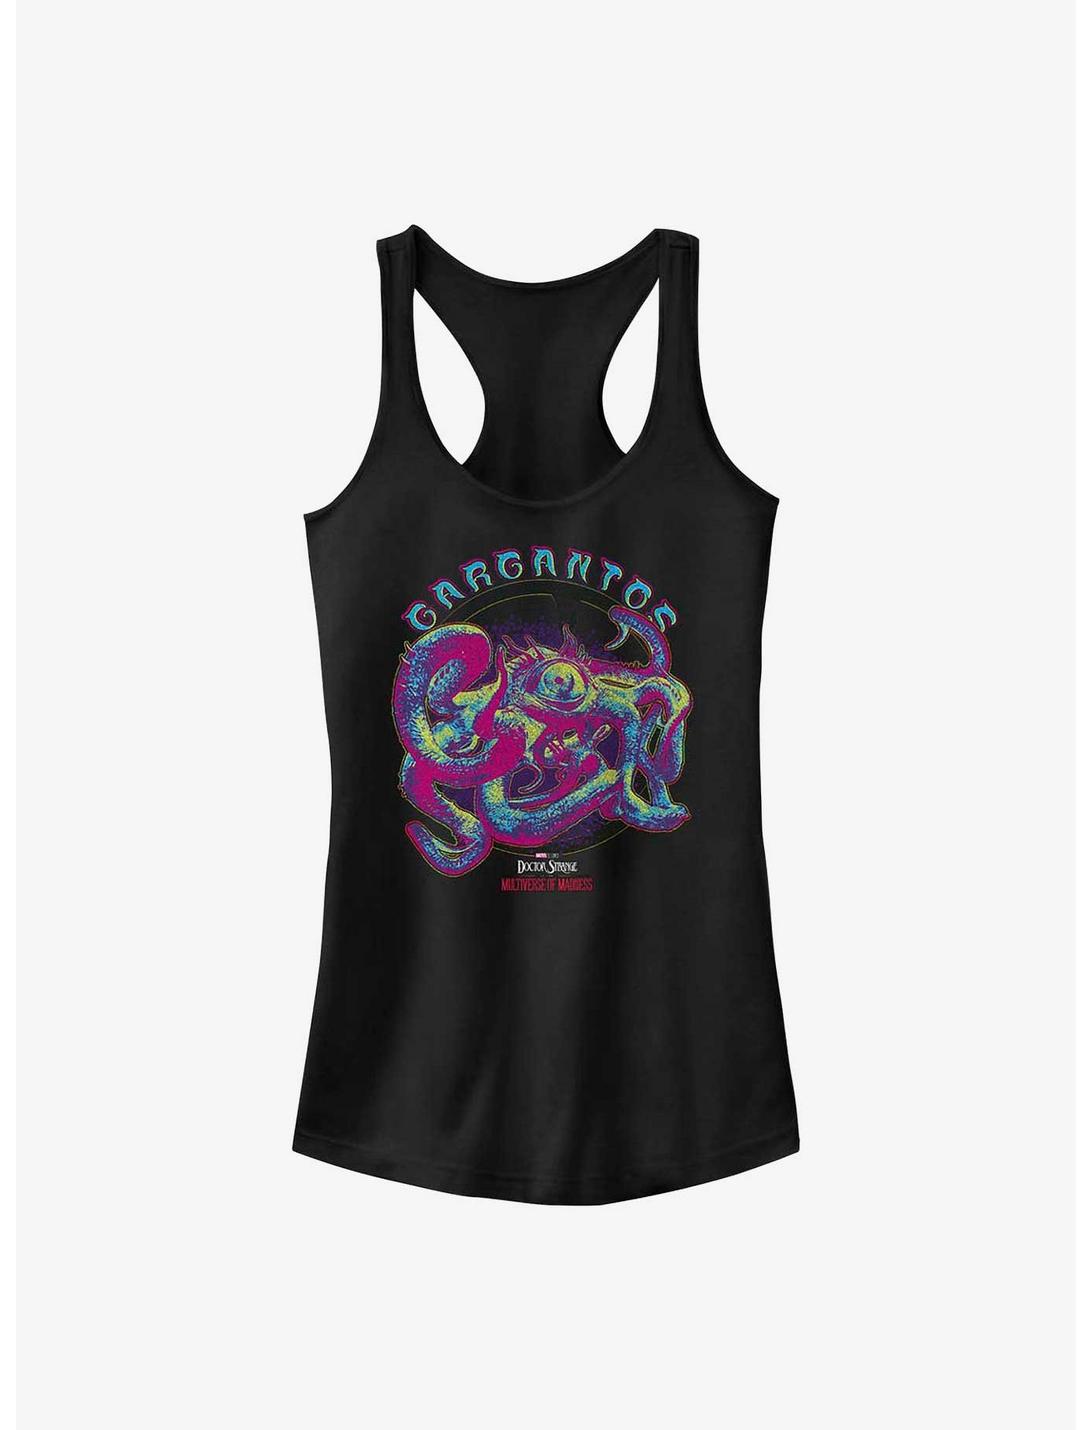 Marvel Doctor Strange In The Multiverse Of Madness Tentacle Caper Girls Tank, BLACK, hi-res